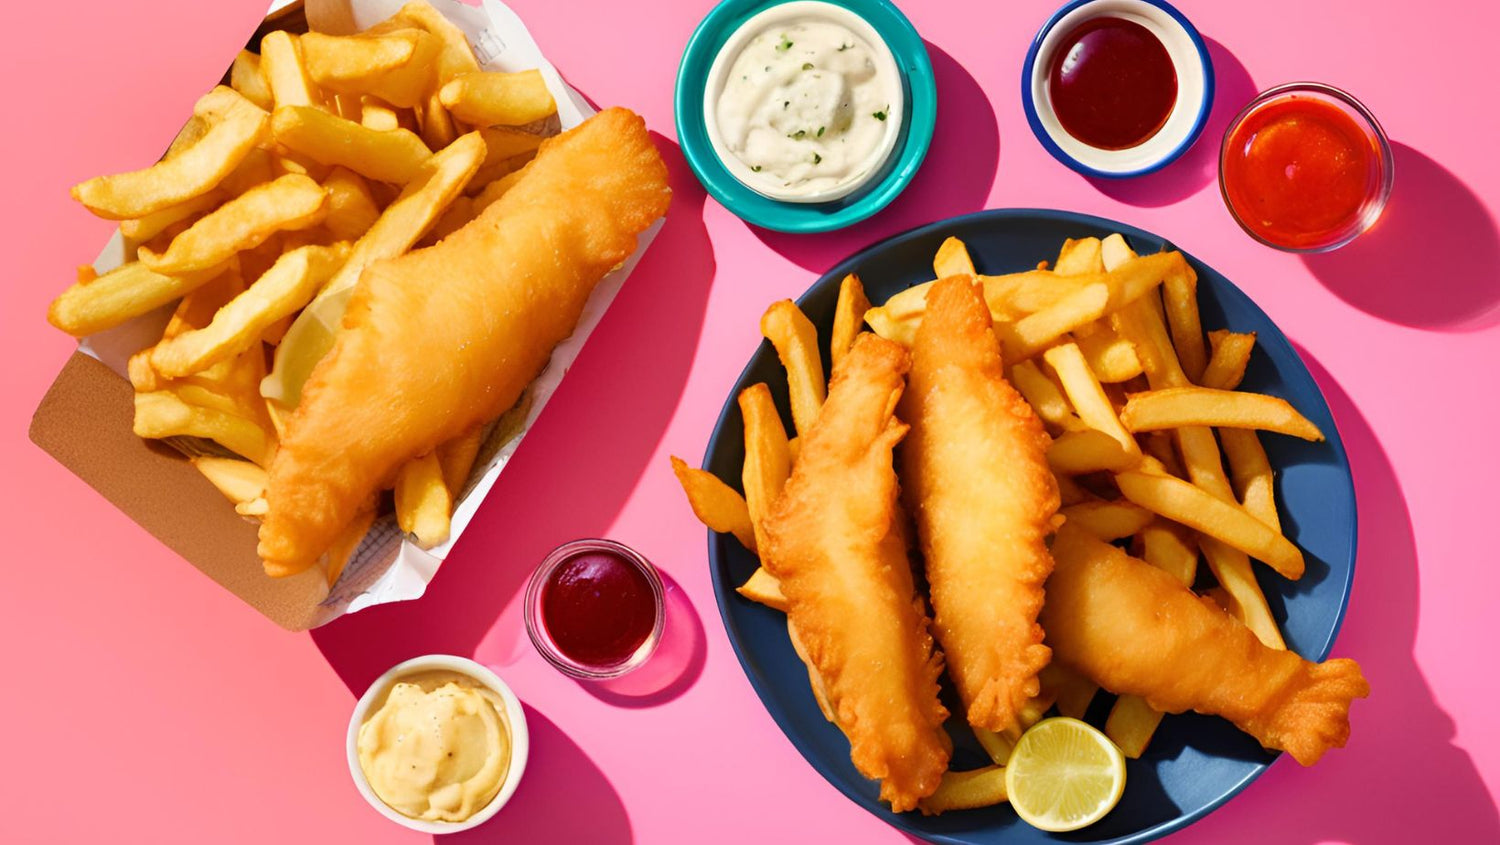 Spice Up Your Friday Fish and Chips with Emelia's